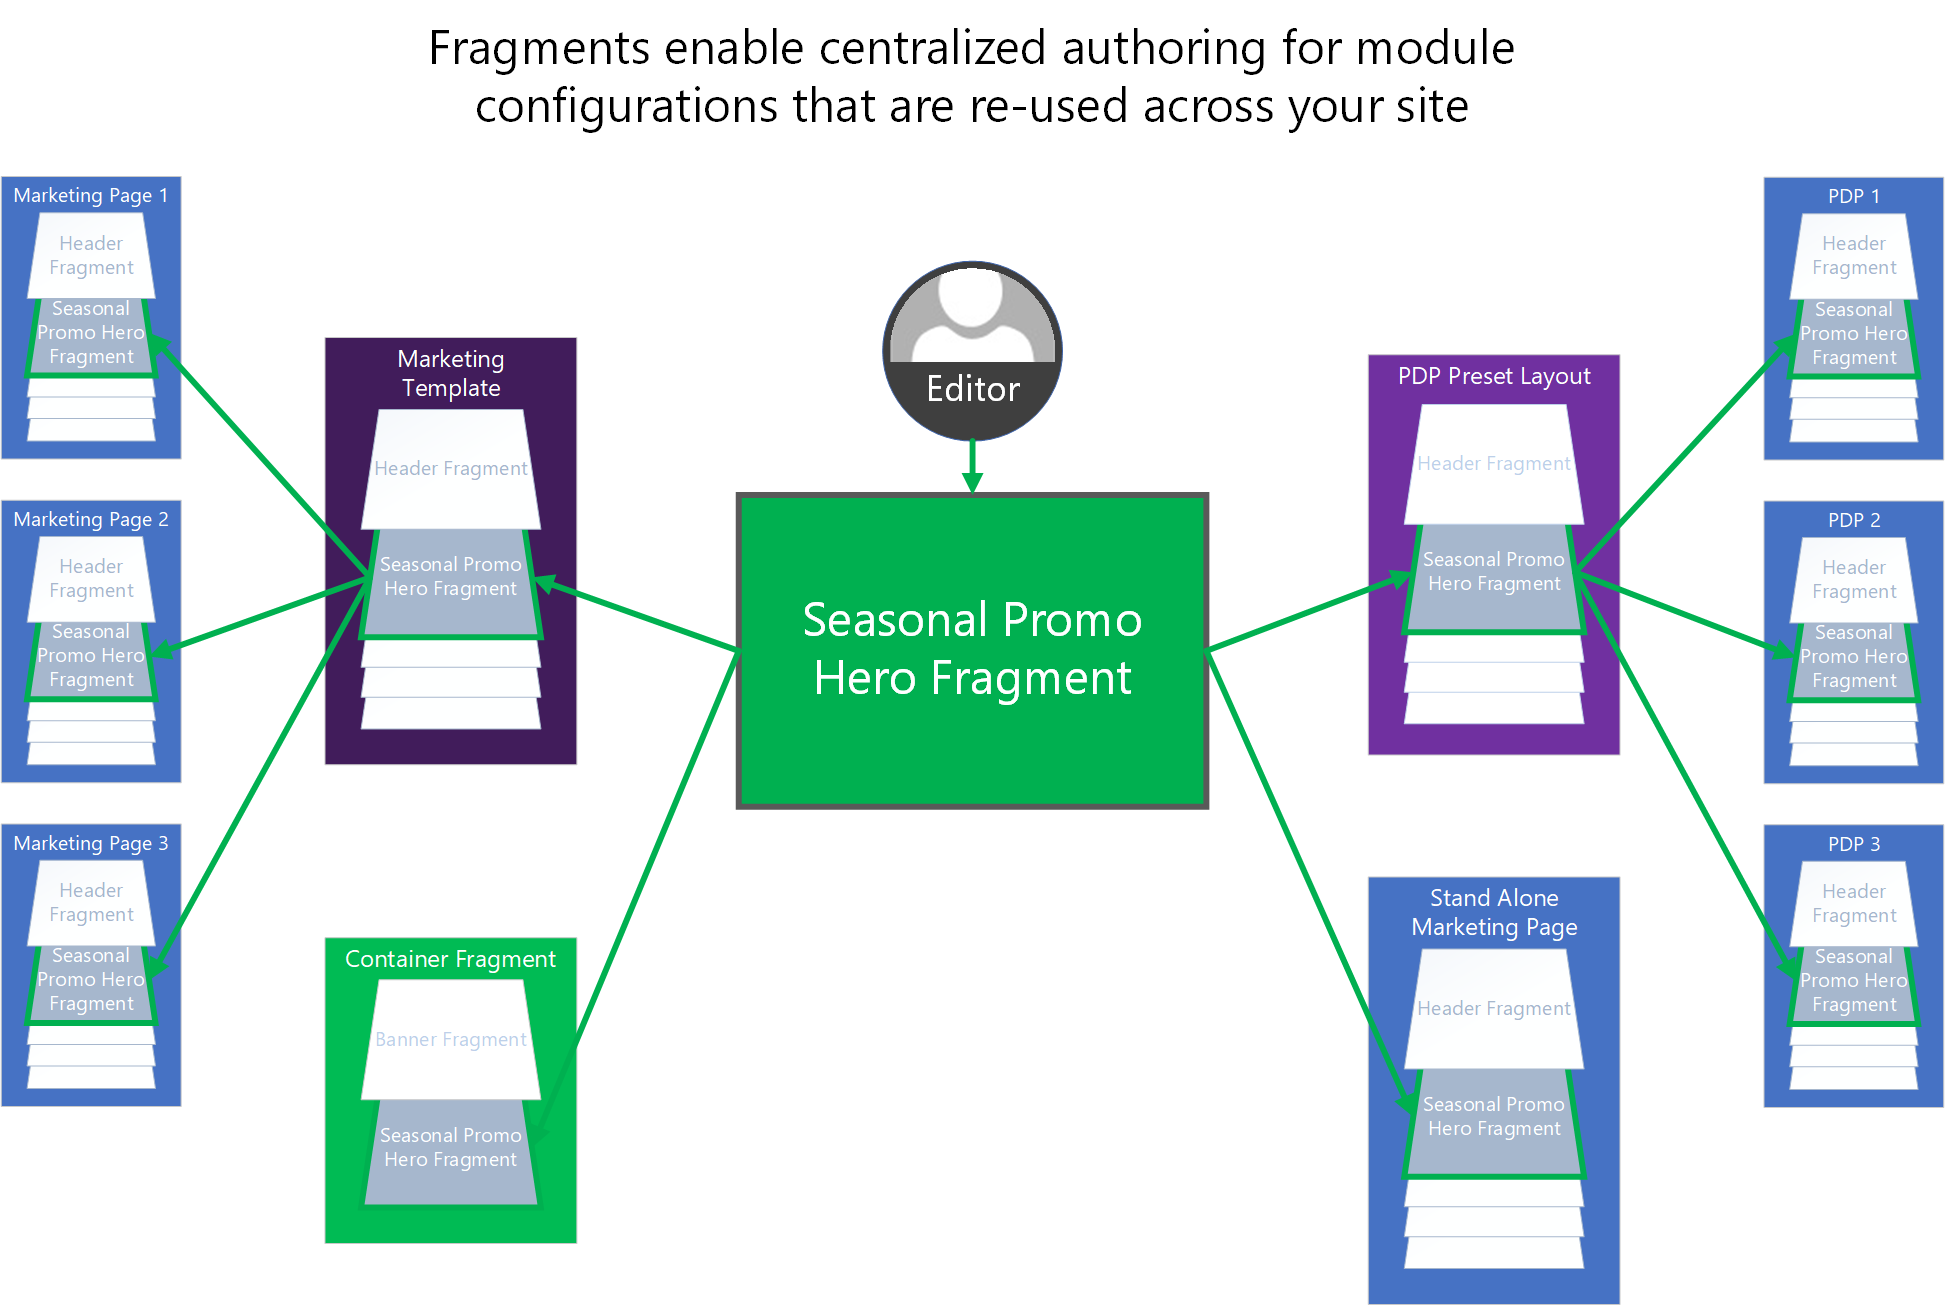 An illustration showing how fragments can be used to centralize authoring of shared module configurations across an e-Commerce site.